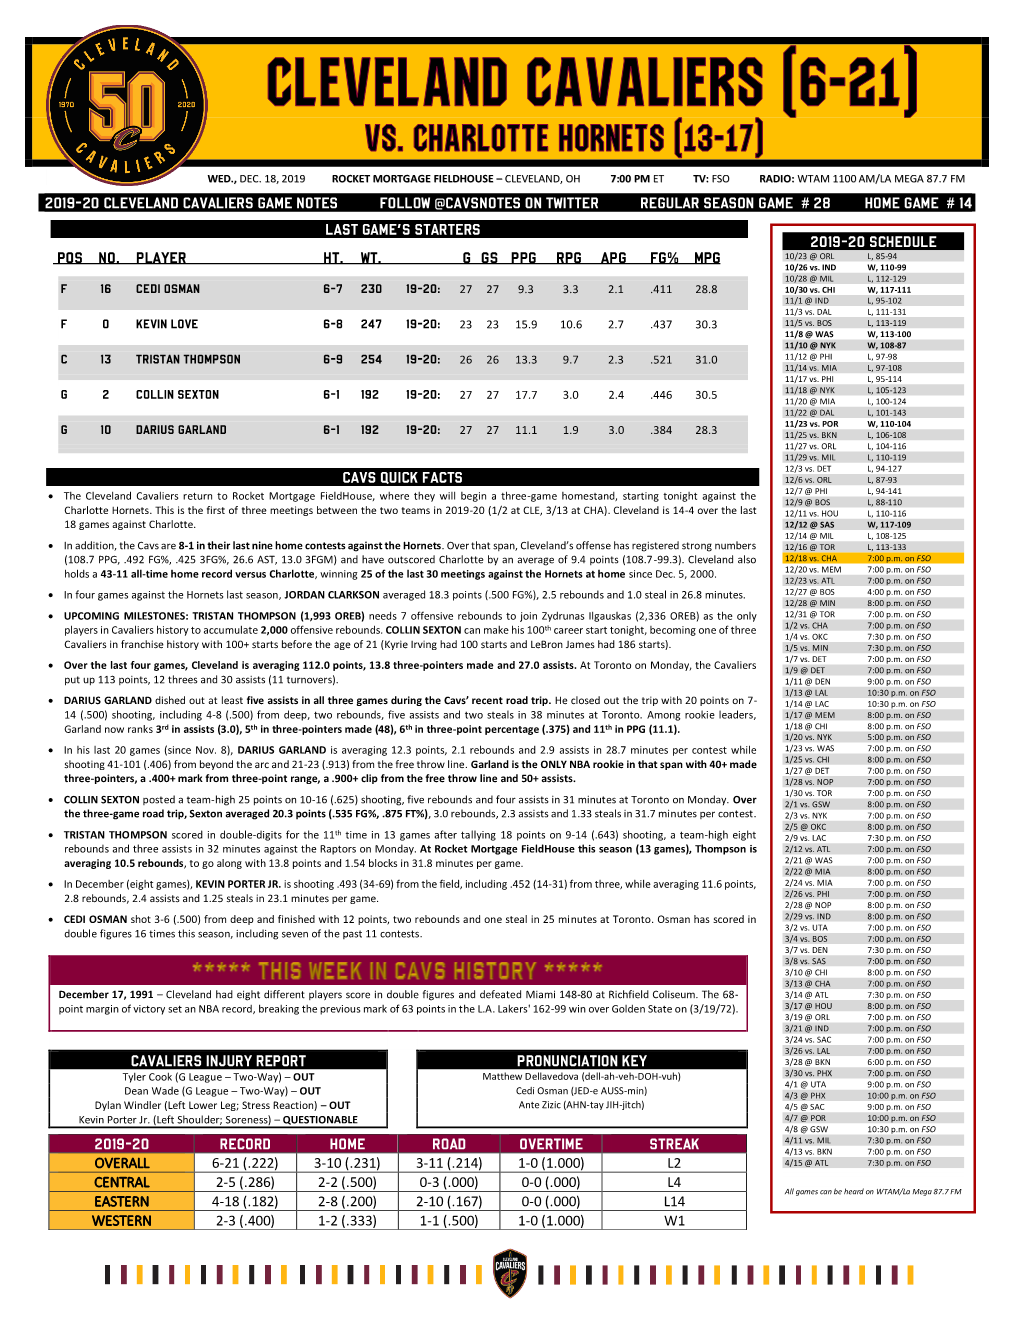 2019-20 Cleveland Cavaliers Game Notes Follow @Cavsnotes on Twitter Regular Season Game # 28 Home Game # 14